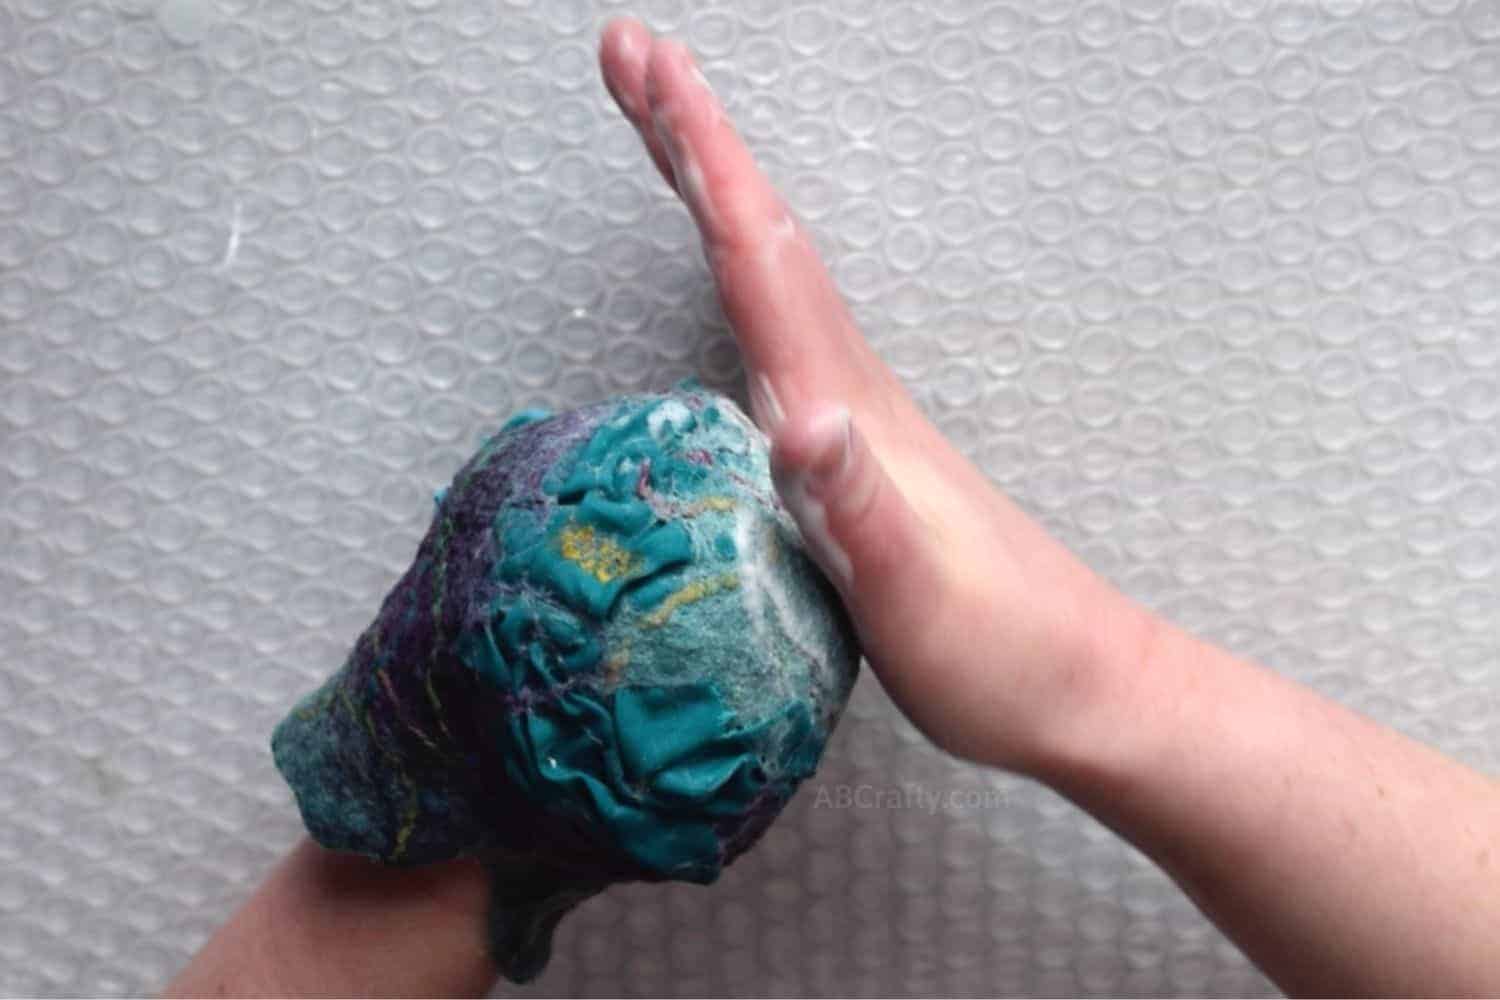 Felting change purse to make it round by putting one hand inside and rubbing from the outside